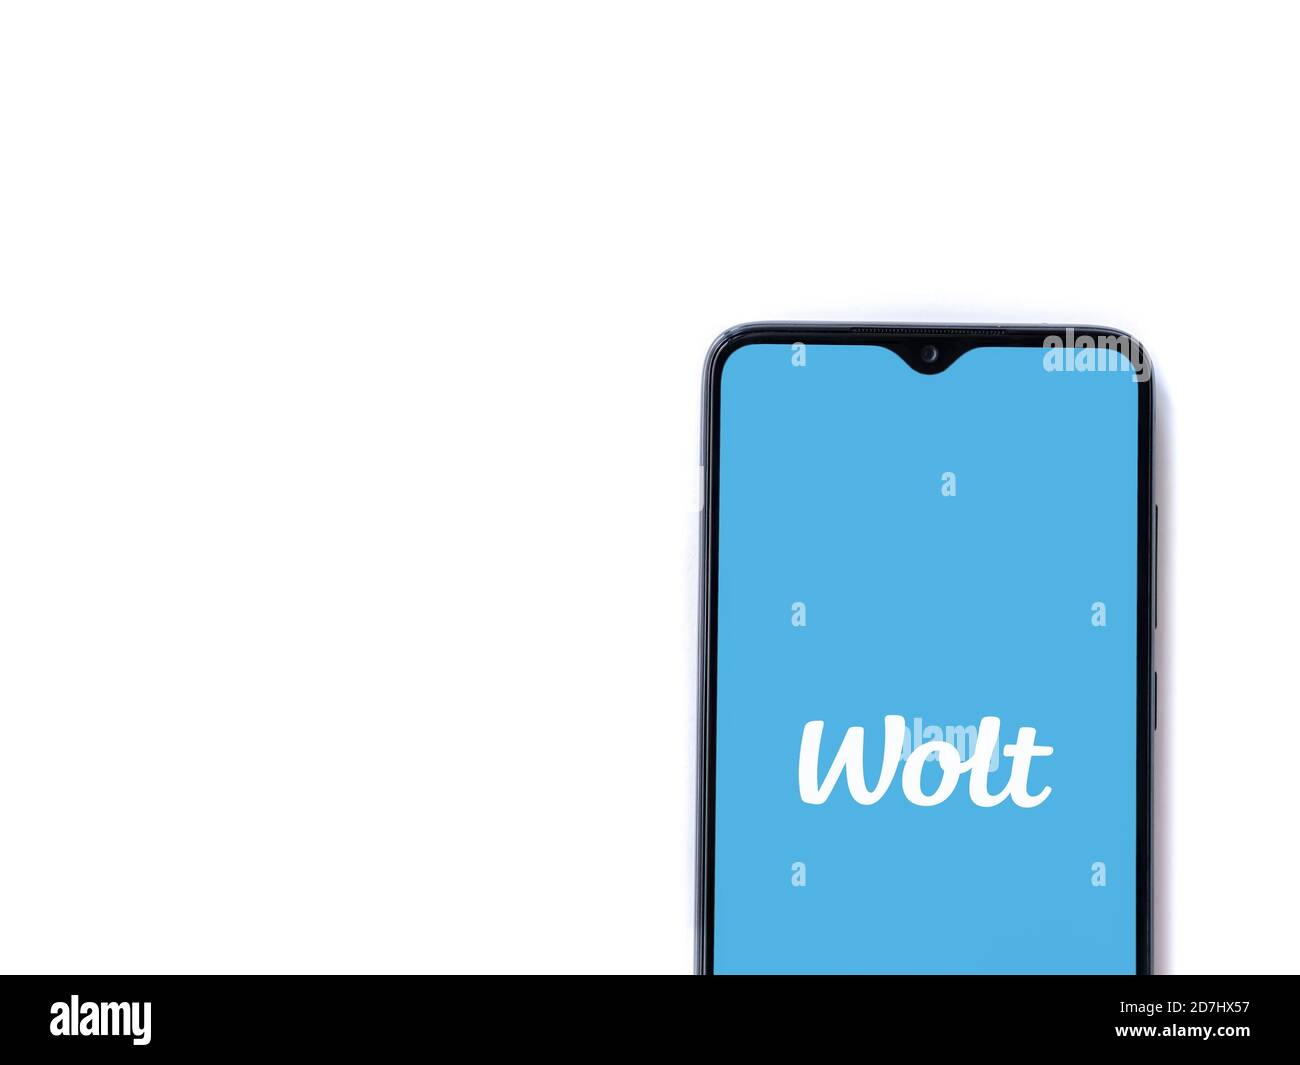 Lod, Israel - July 8, 2020: Wolt app launch screen with logo on the display of a black mobile smartphone isolated on white background. Top view flat l Stock Photo